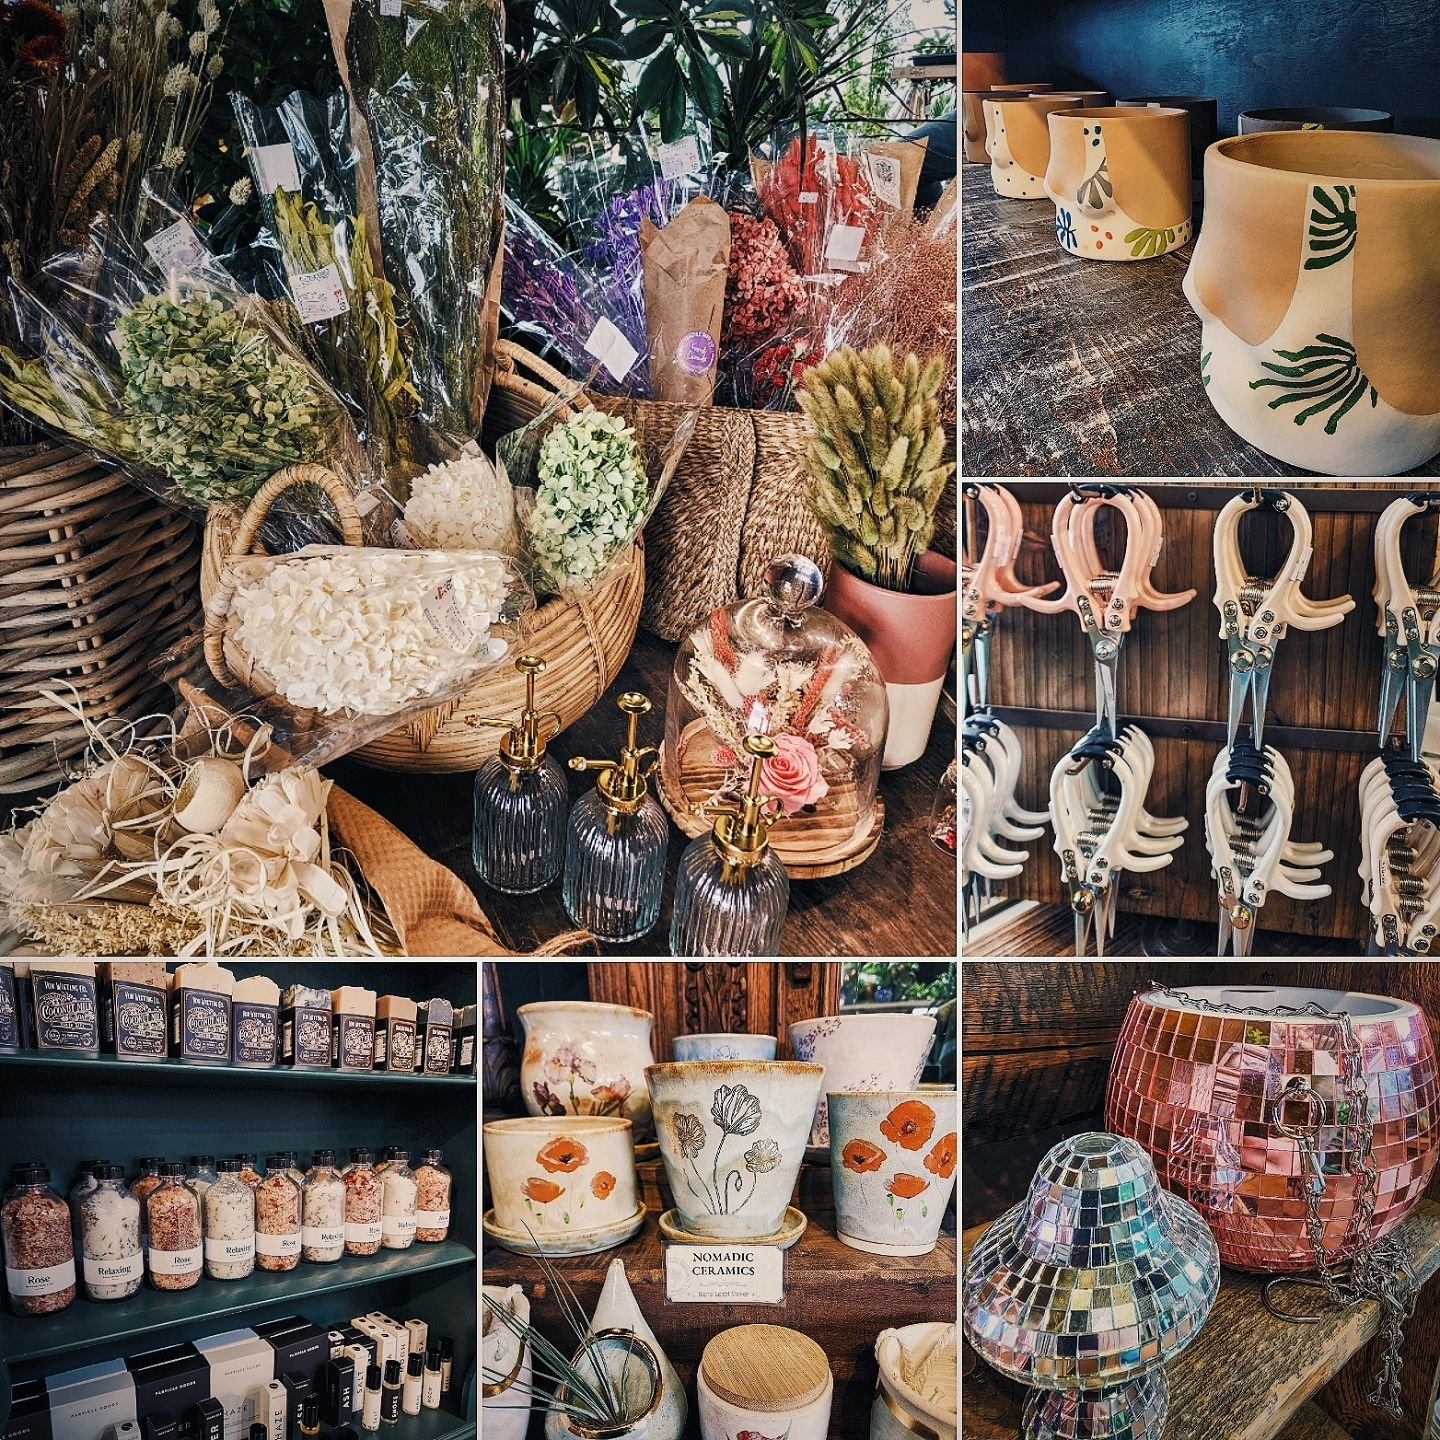 Some of our lovely gift ideas for Mothers Day in just a few weeks. We have floral teas, bath salts, candles, cards, planters, and loads of plants on the way. We also have elaborated on our dried floral selection and have cool glassware and budvases o